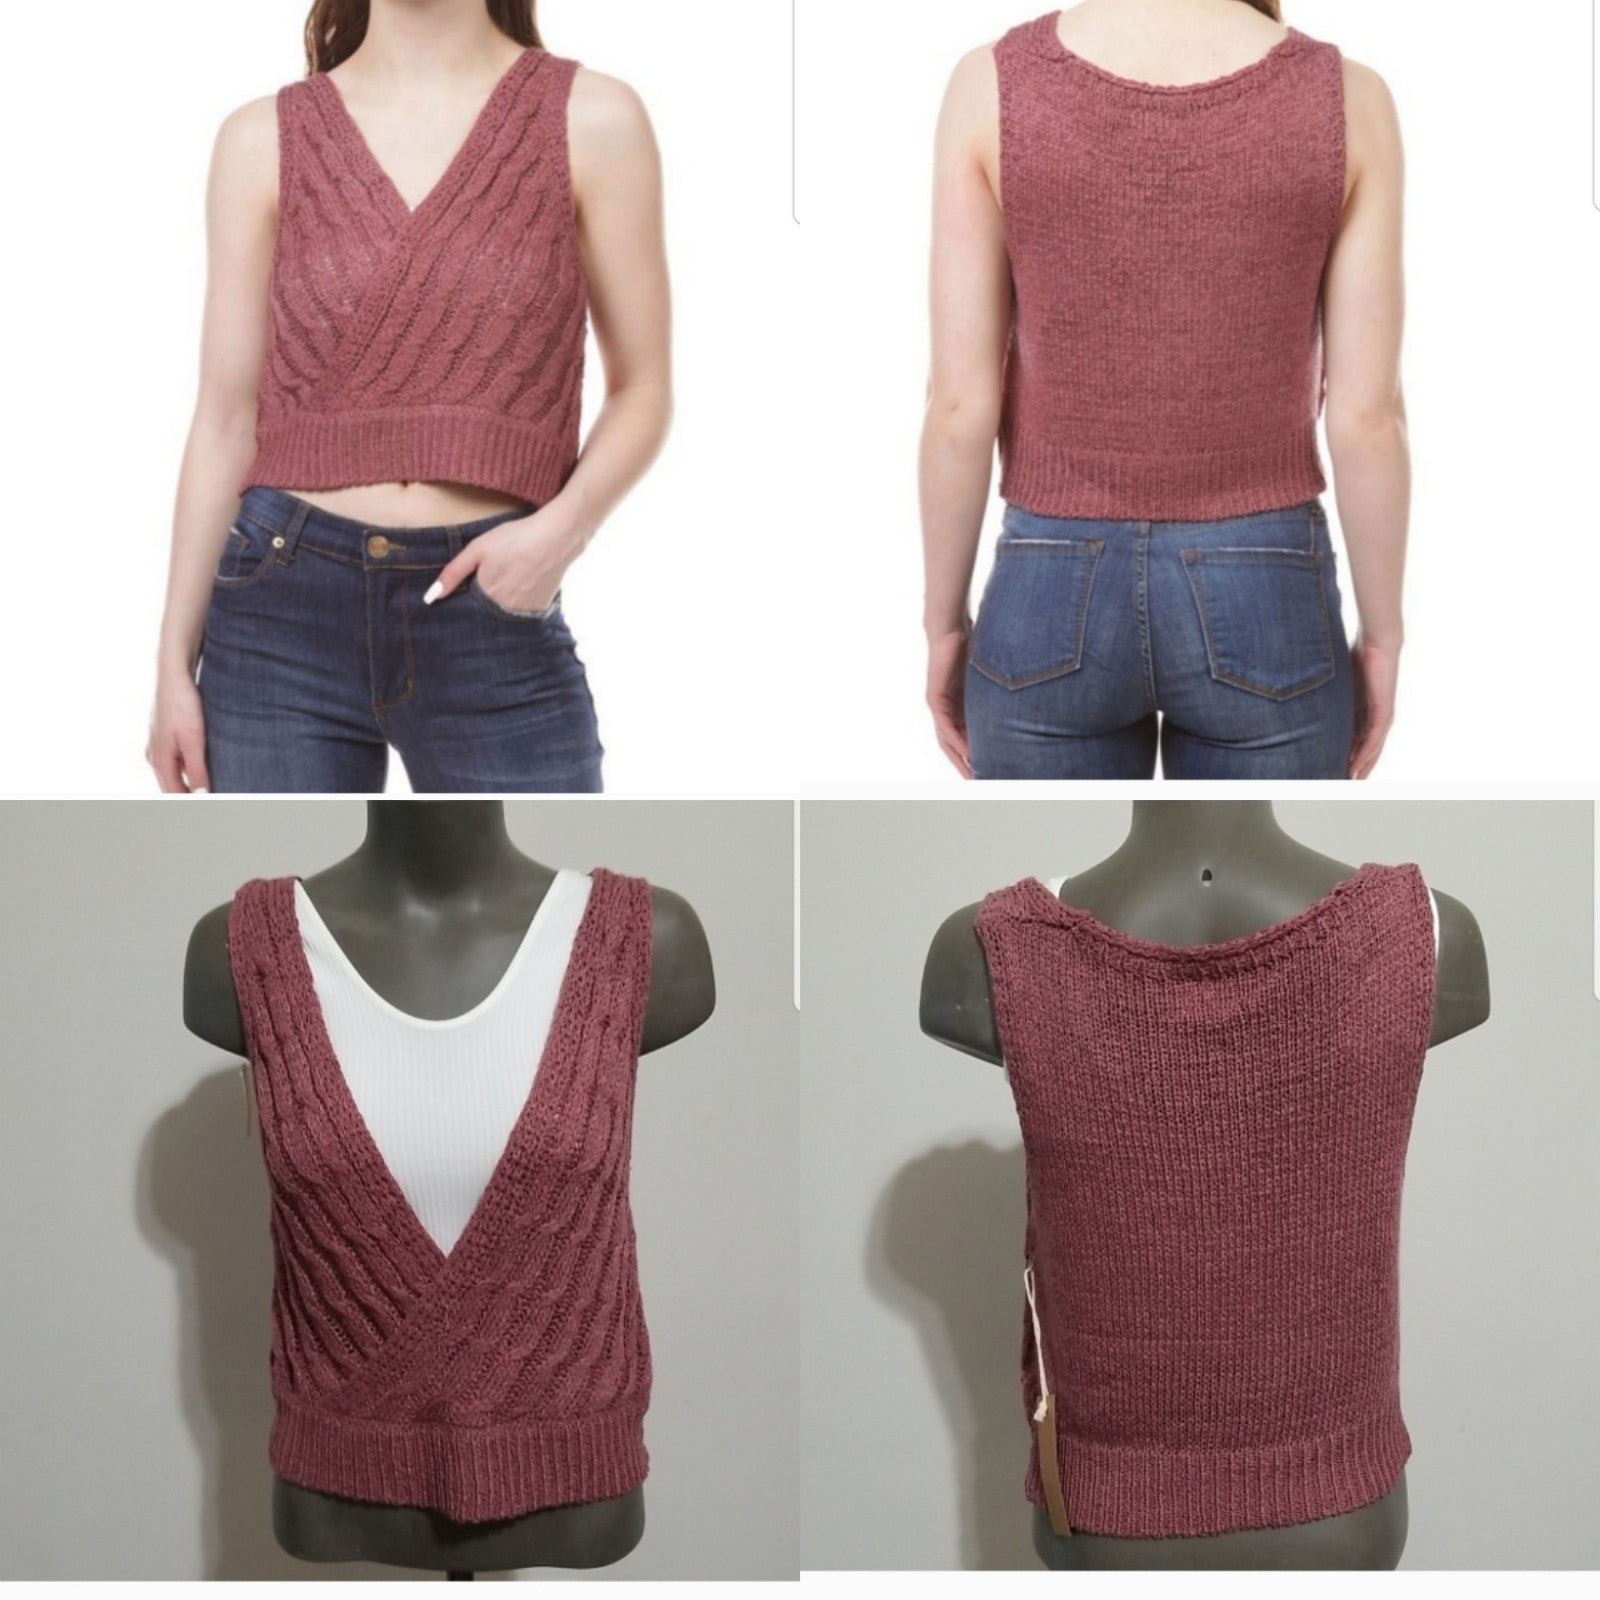 the Lowest price Sweater Tank in rose sz large G91CcuzW